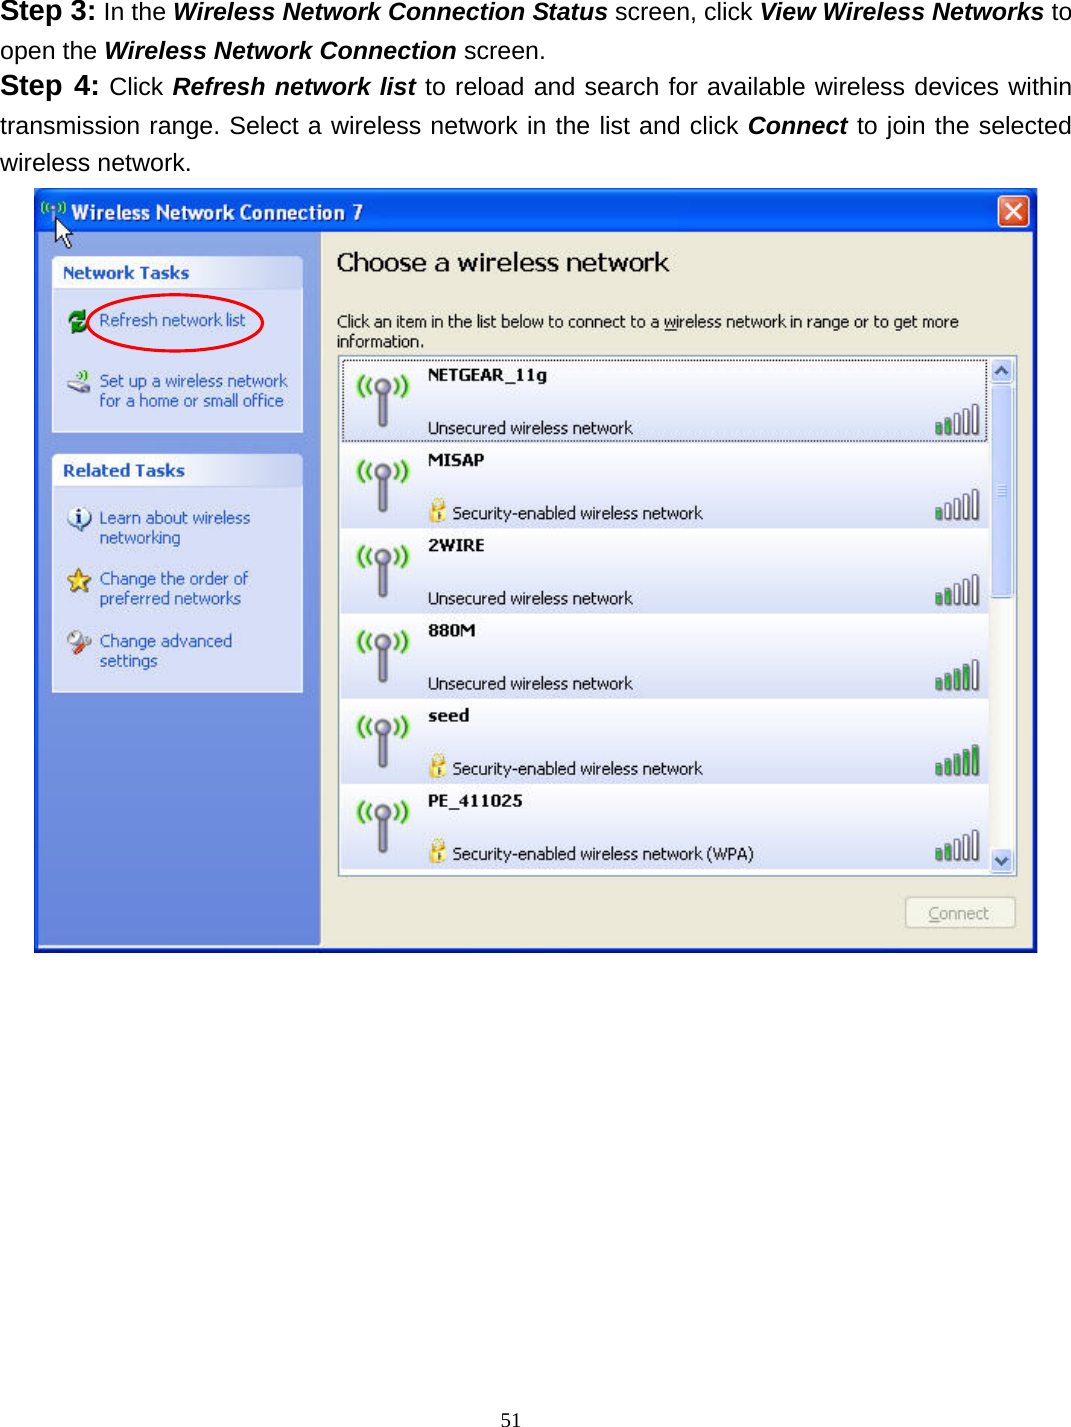  51 Step 3: In the Wireless Network Connection Status screen, click View Wireless Networks to open the Wireless Network Connection screen. Step 4: Click Refresh network list to reload and search for available wireless devices within transmission range. Select a wireless network in the list and click Connect to join the selected wireless network.  